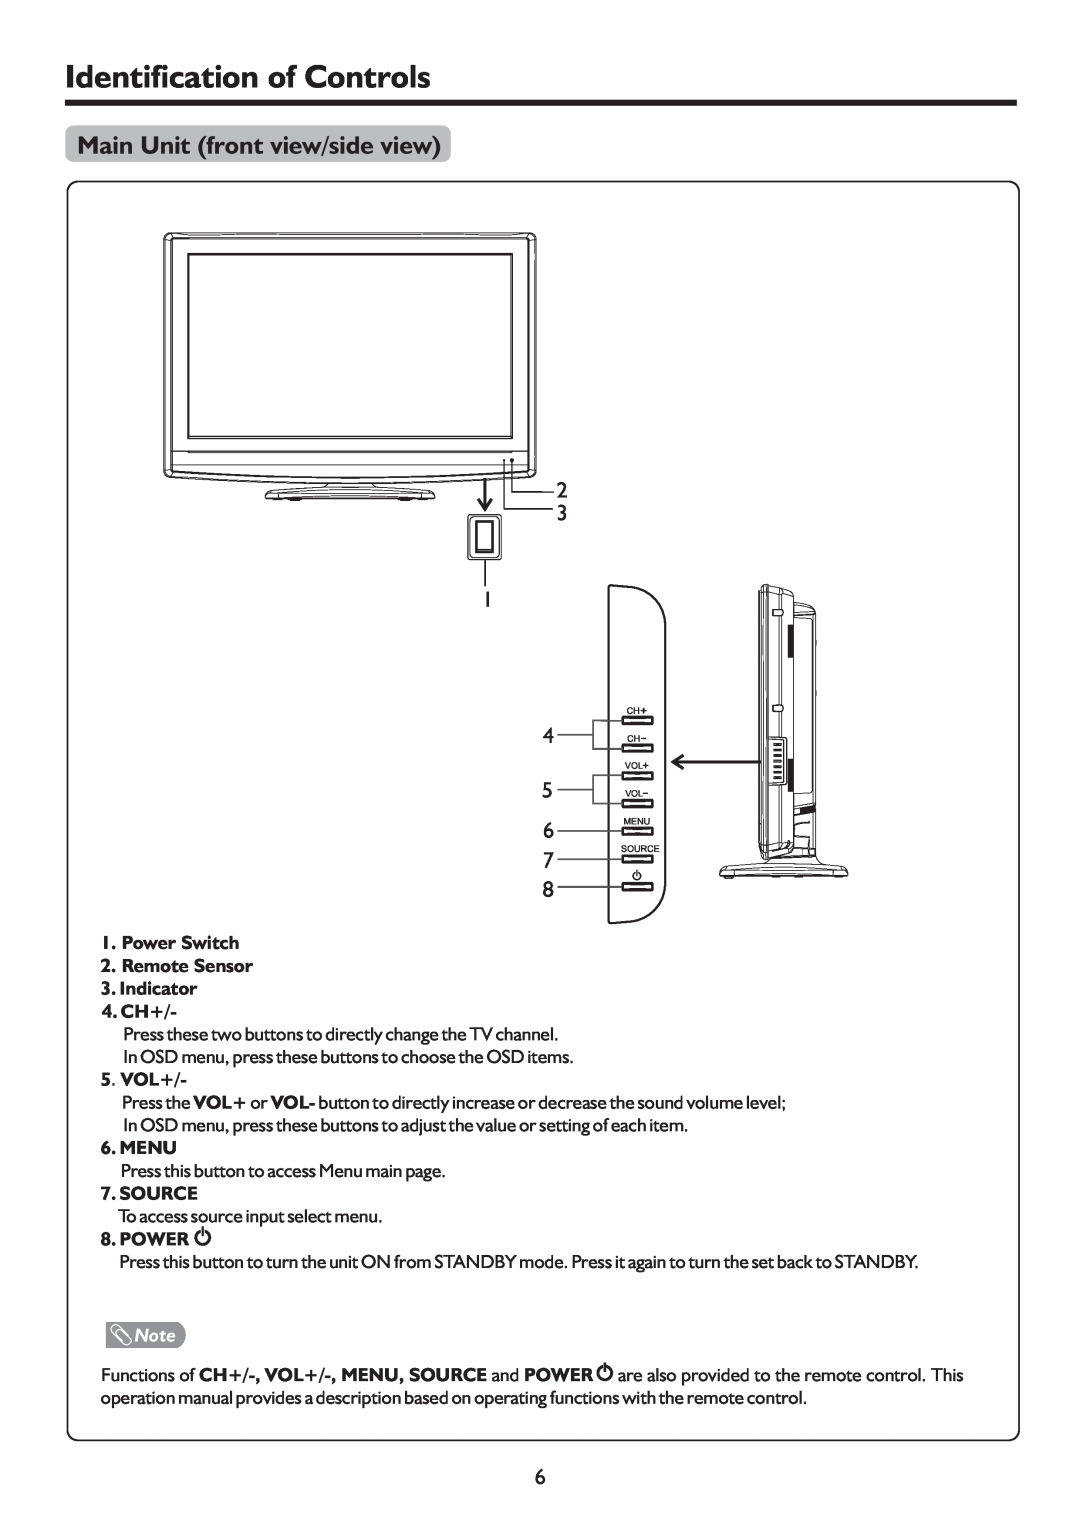 Palsonic TFTV818HD owner manual Identification of Controls, Main Unit front view/side view, 5.VOL+, Menu, Source, Power 